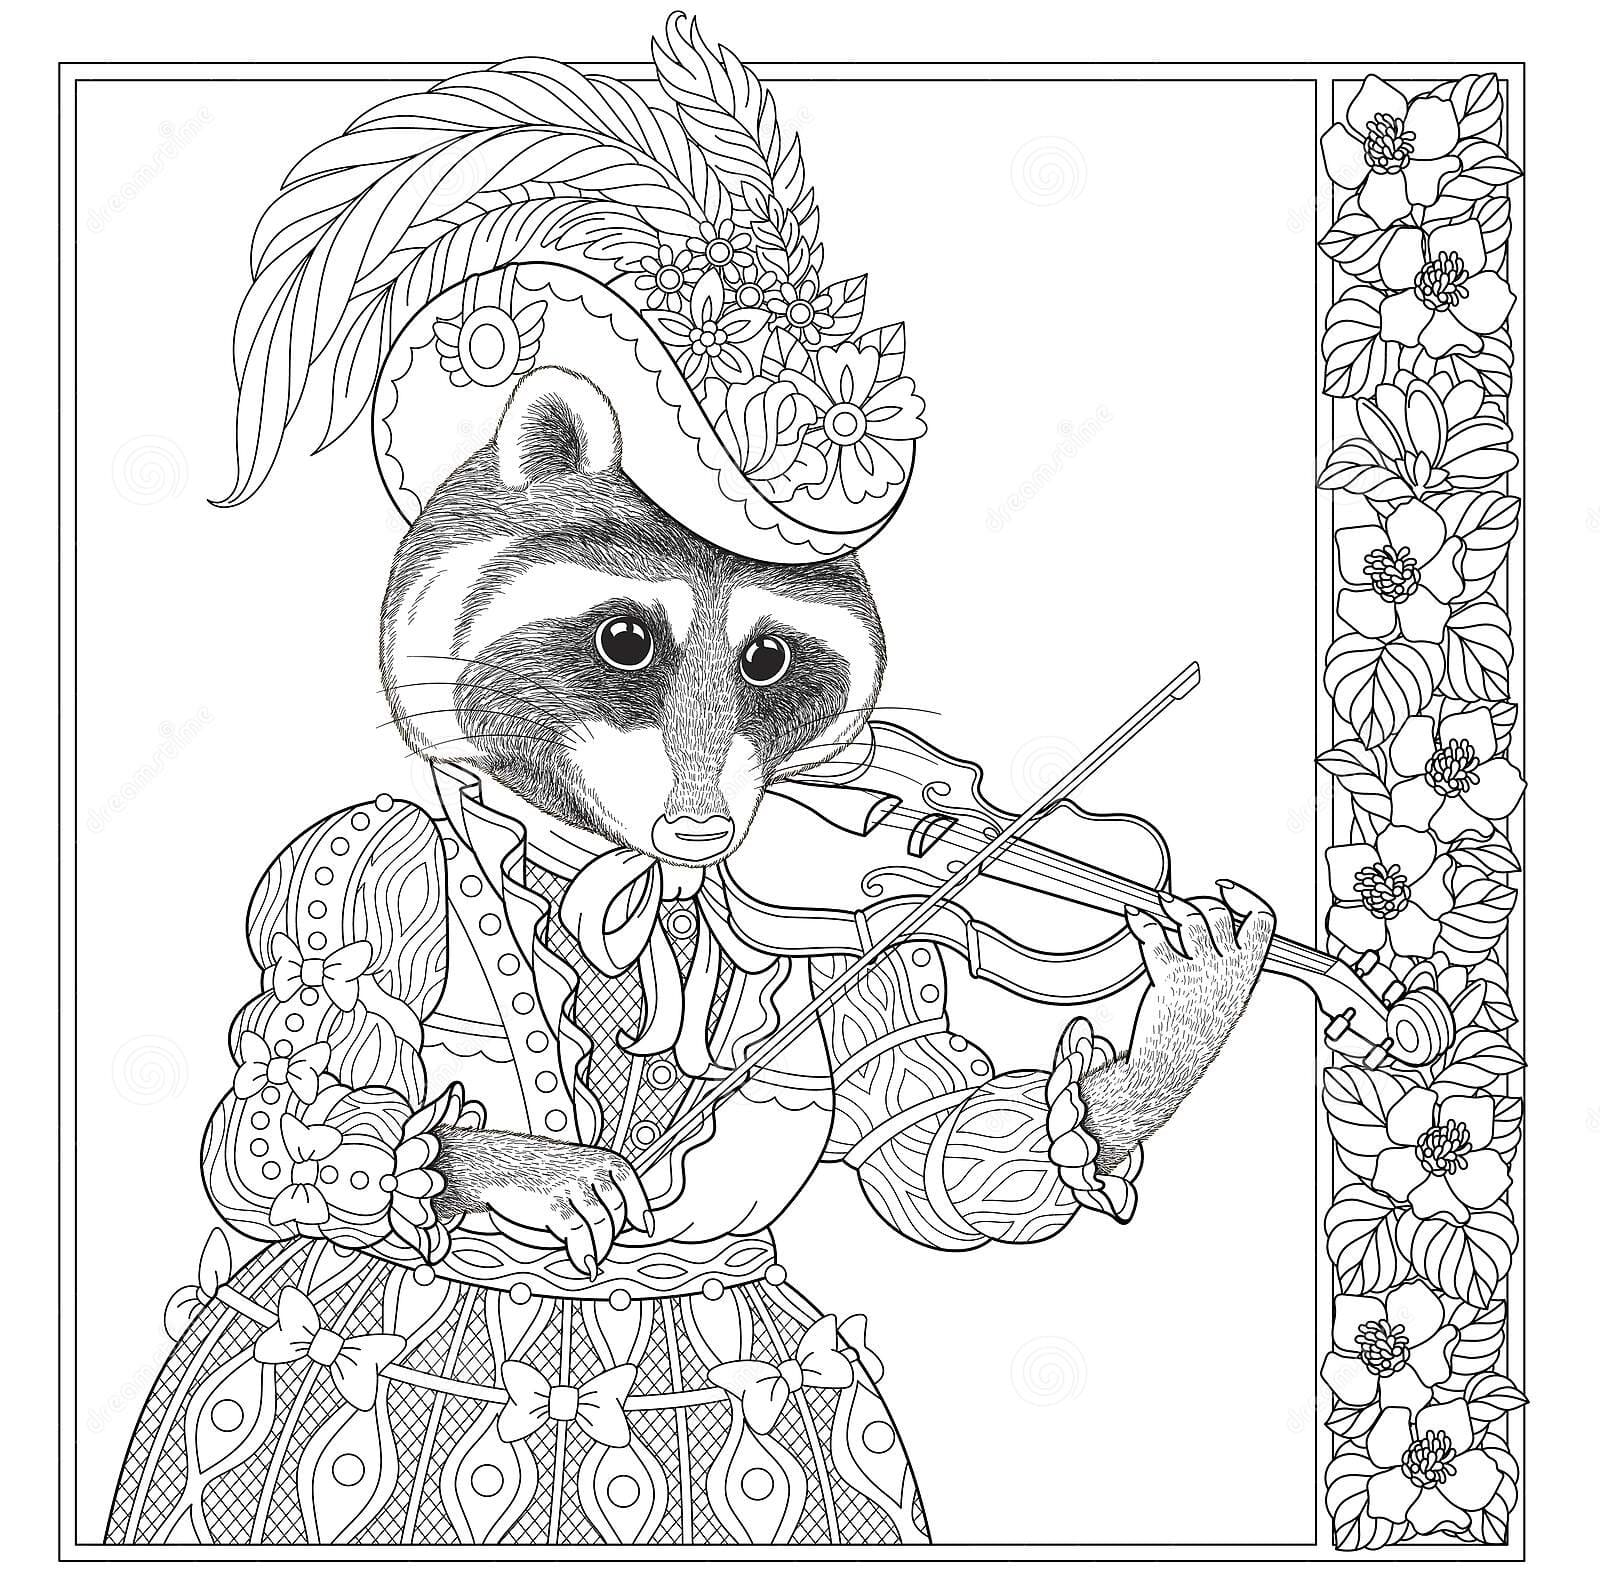 Cute Raccoon And Violon Coloring Page